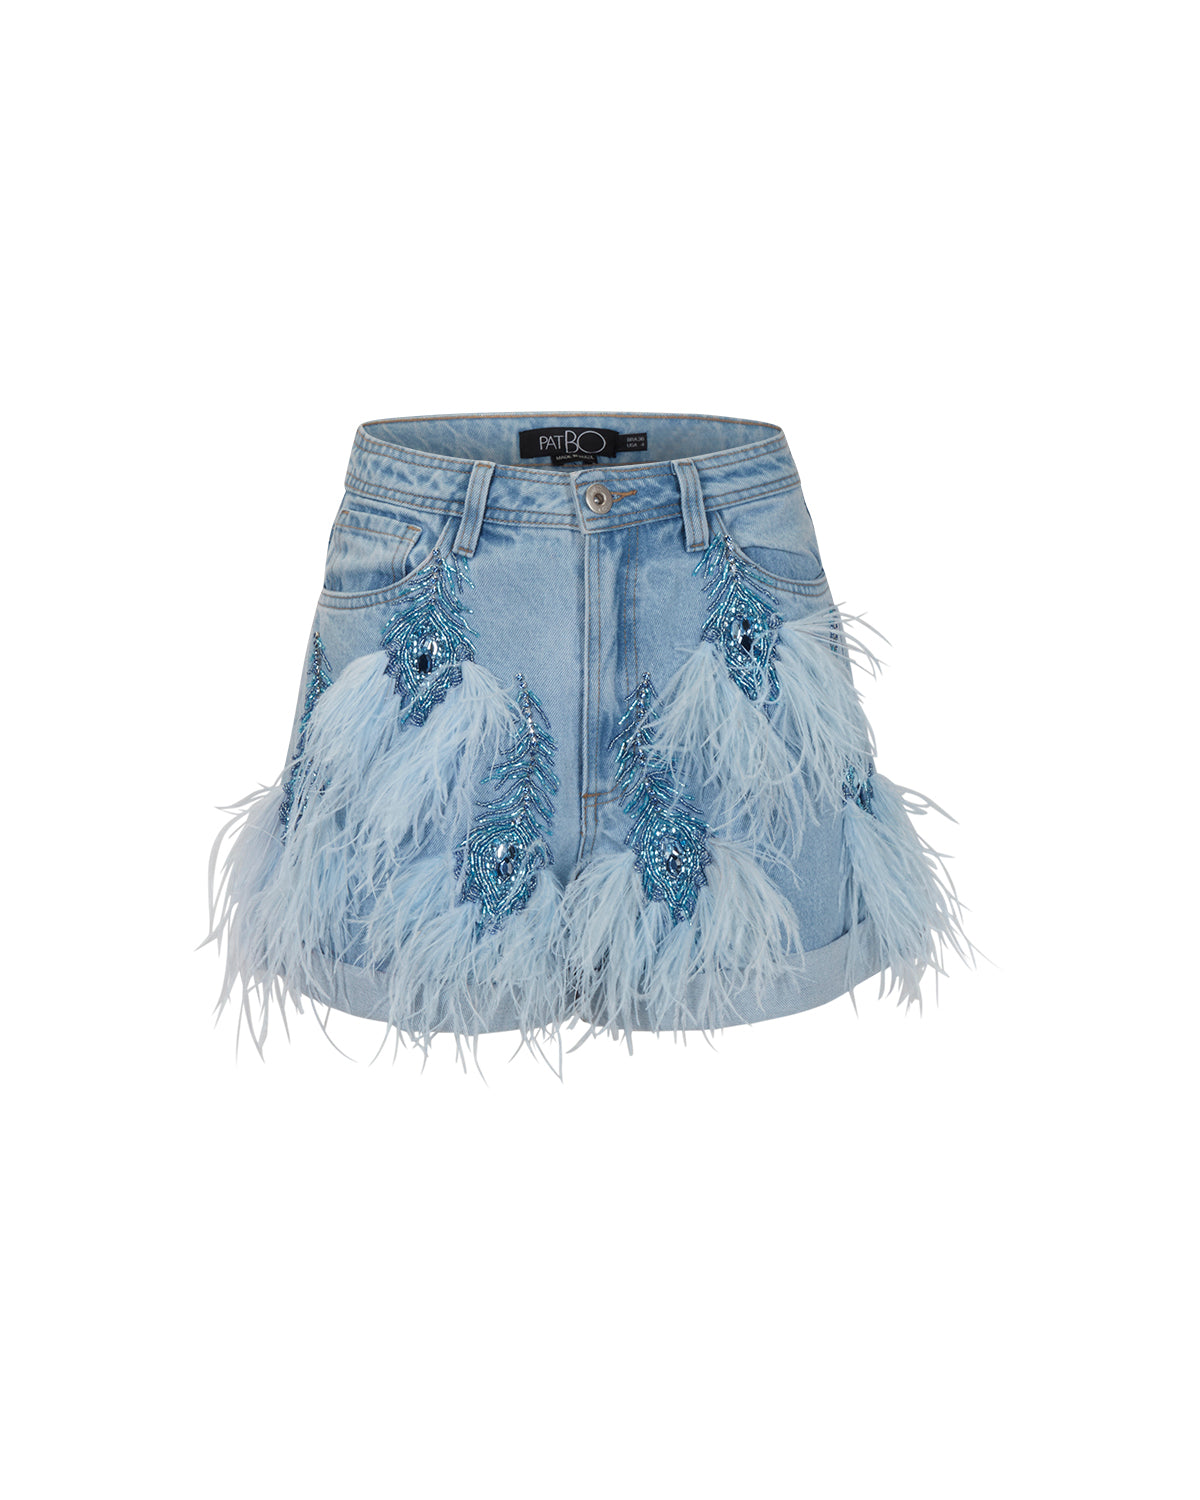 Beaded Feather Denim Shorts (EXCLUSIVE)